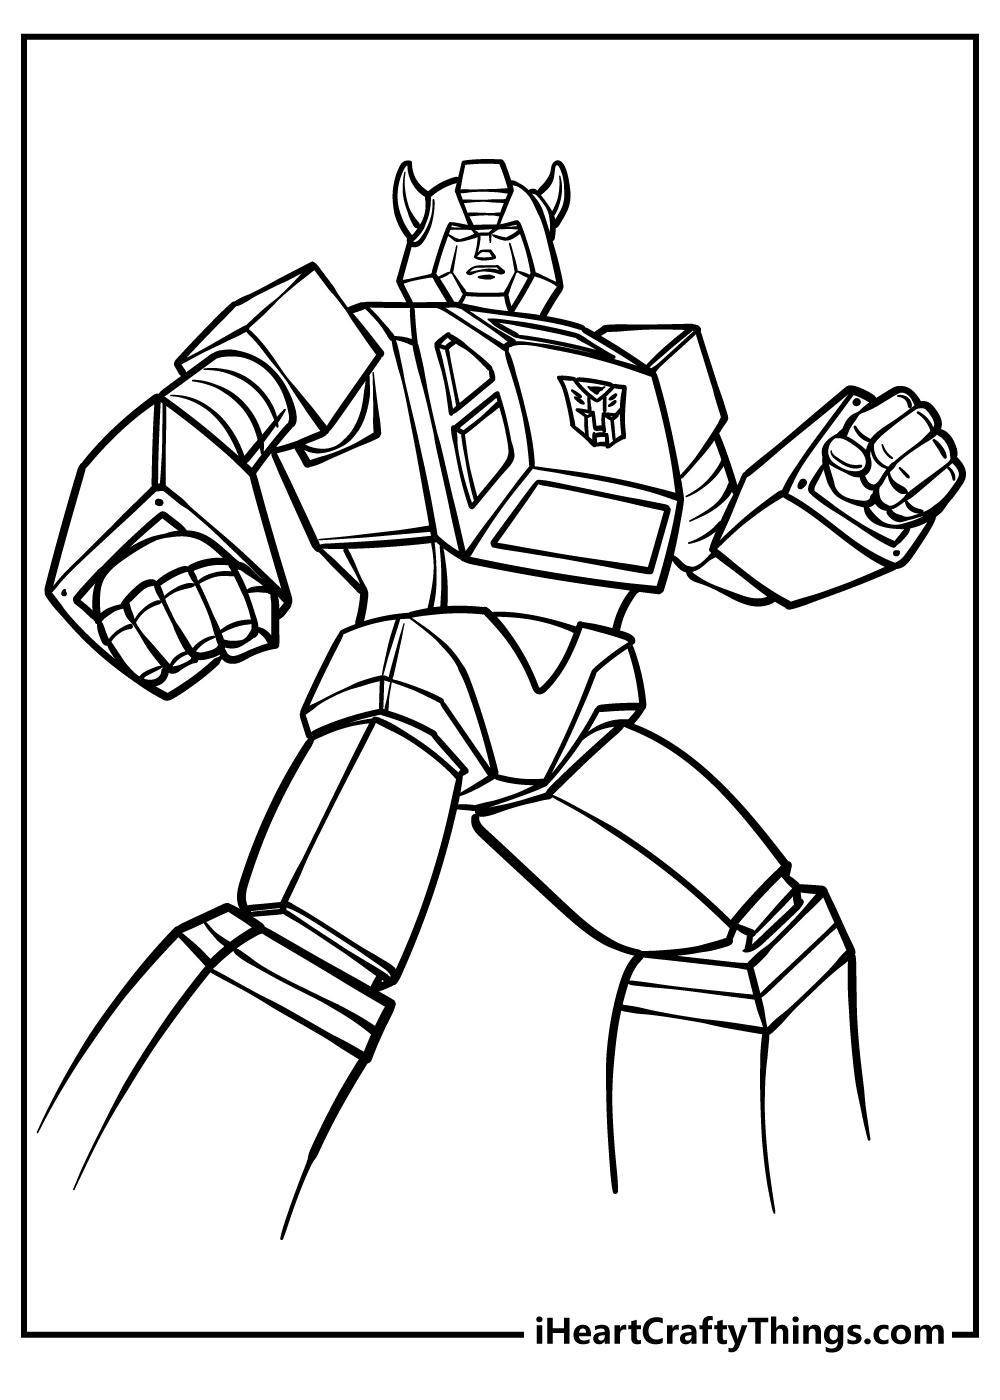 Transformers Coloring Pages free pdf download